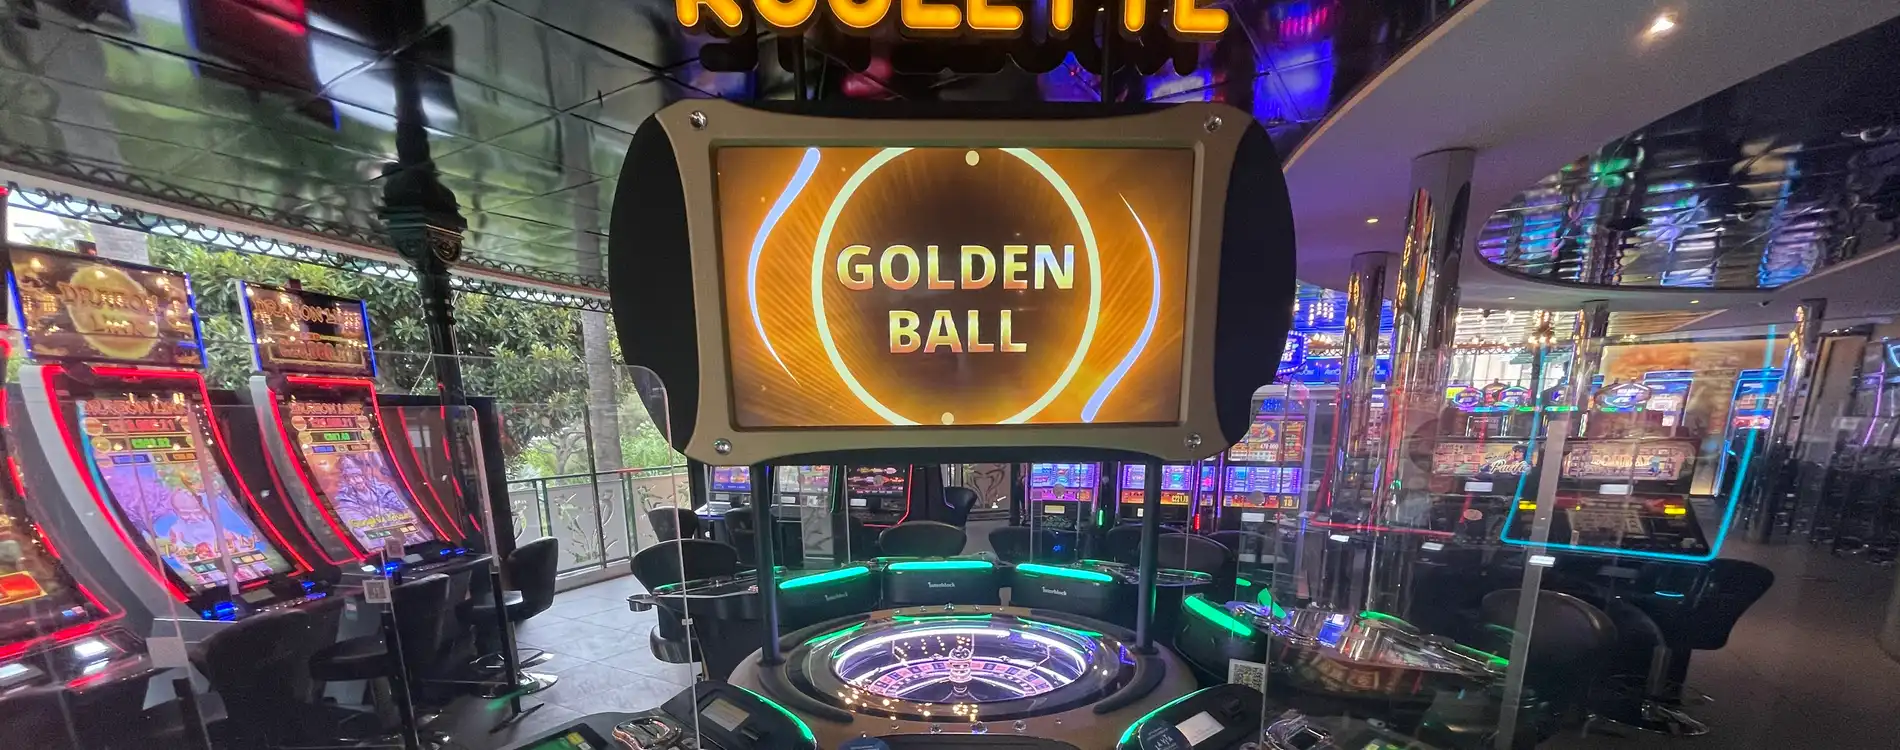 Machines a sous side Bet Lucky Number Golden Ball roulette electronique